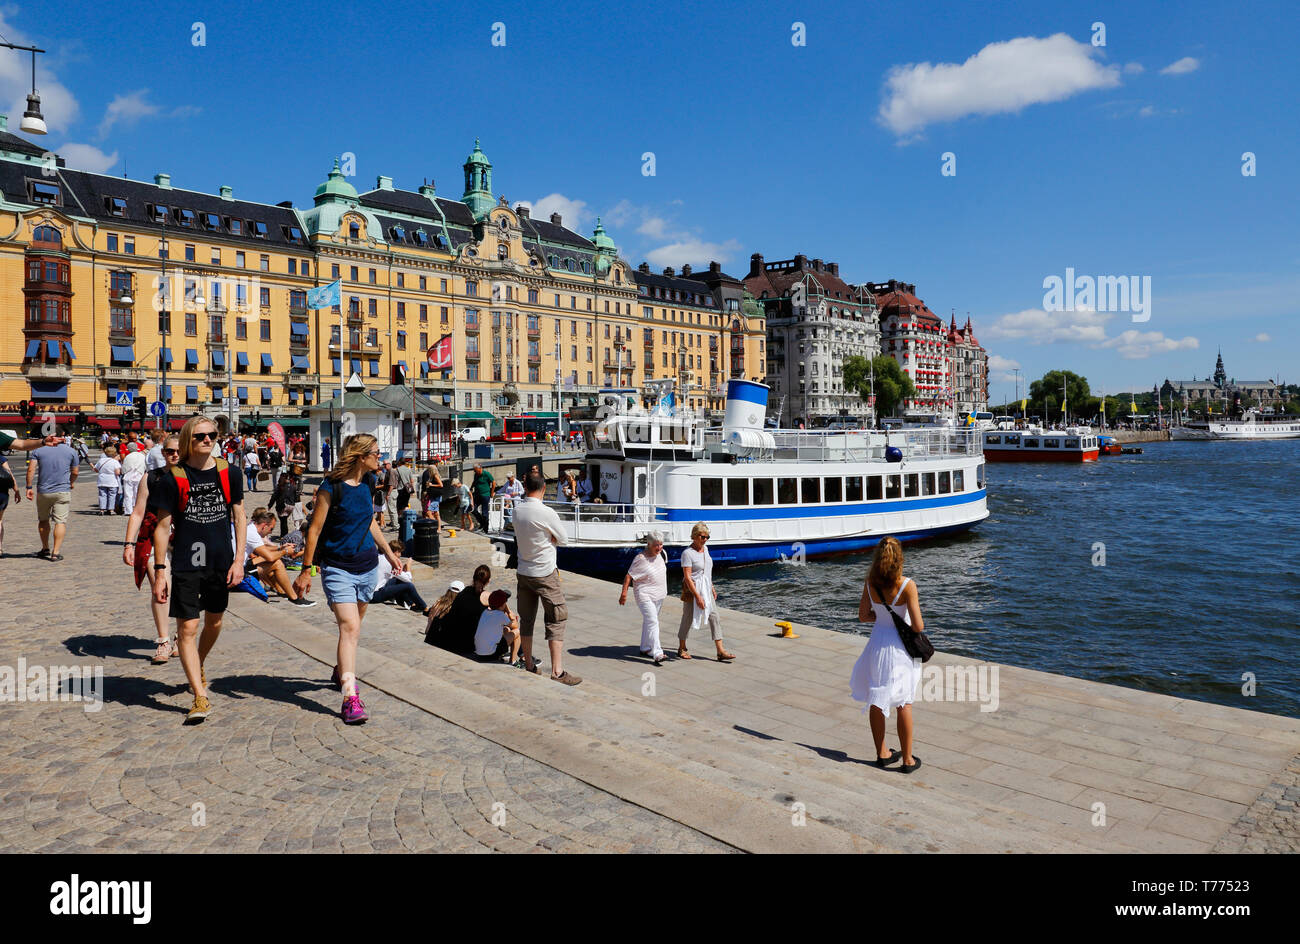 Stockholm, Sweden - July 12, 2018: The Nybroplan area with people in front of the public transportation ferry. Stock Photo